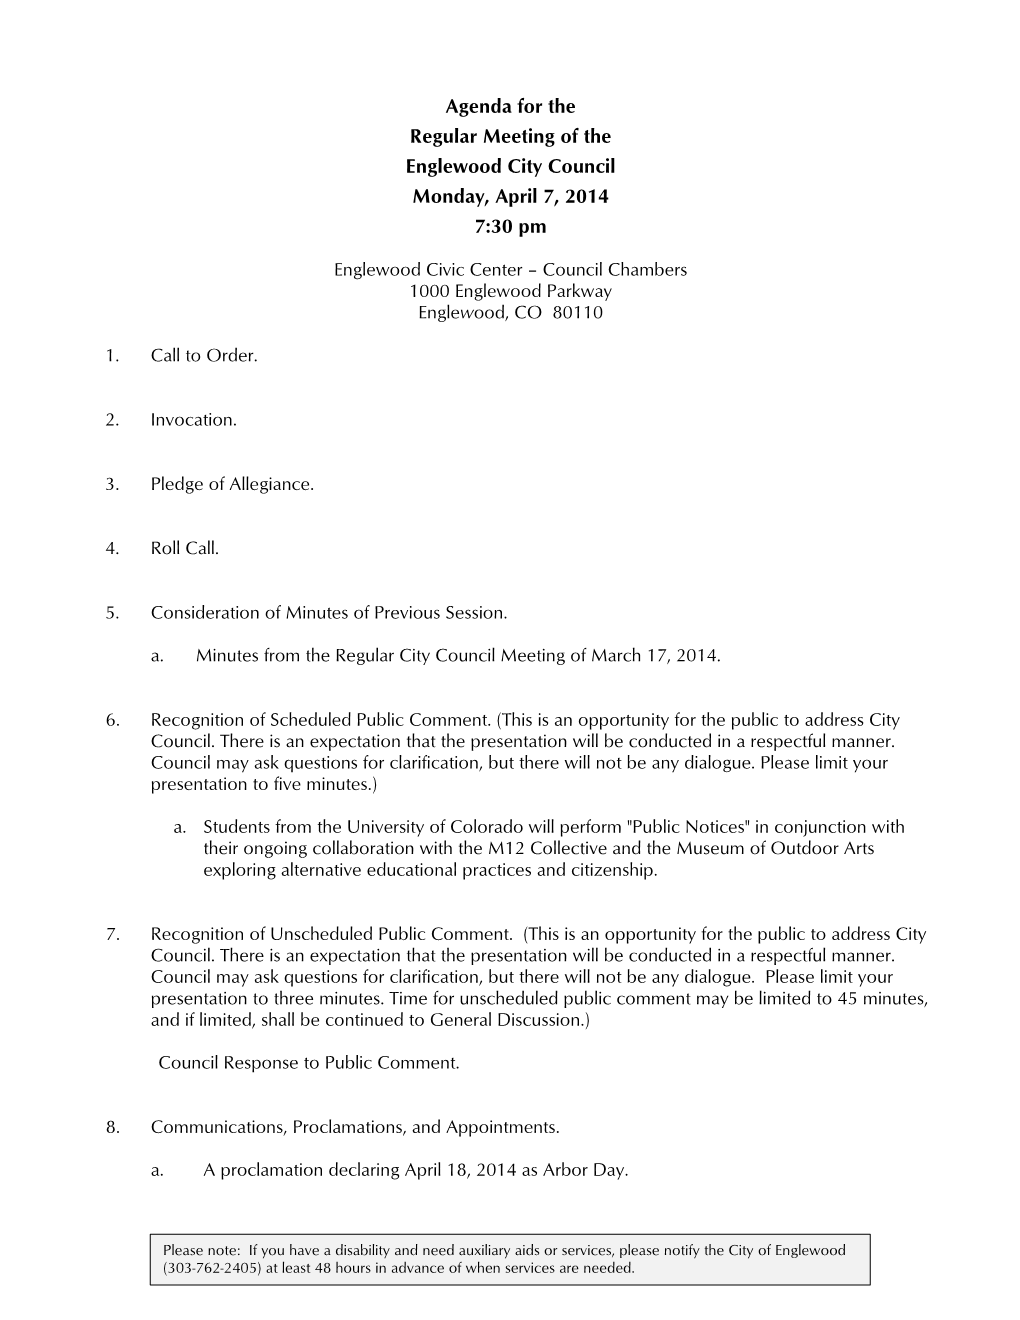 Agenda for the Regular Meeting of the Englewood City Council Monday, April 7, 2014 7:30 Pm